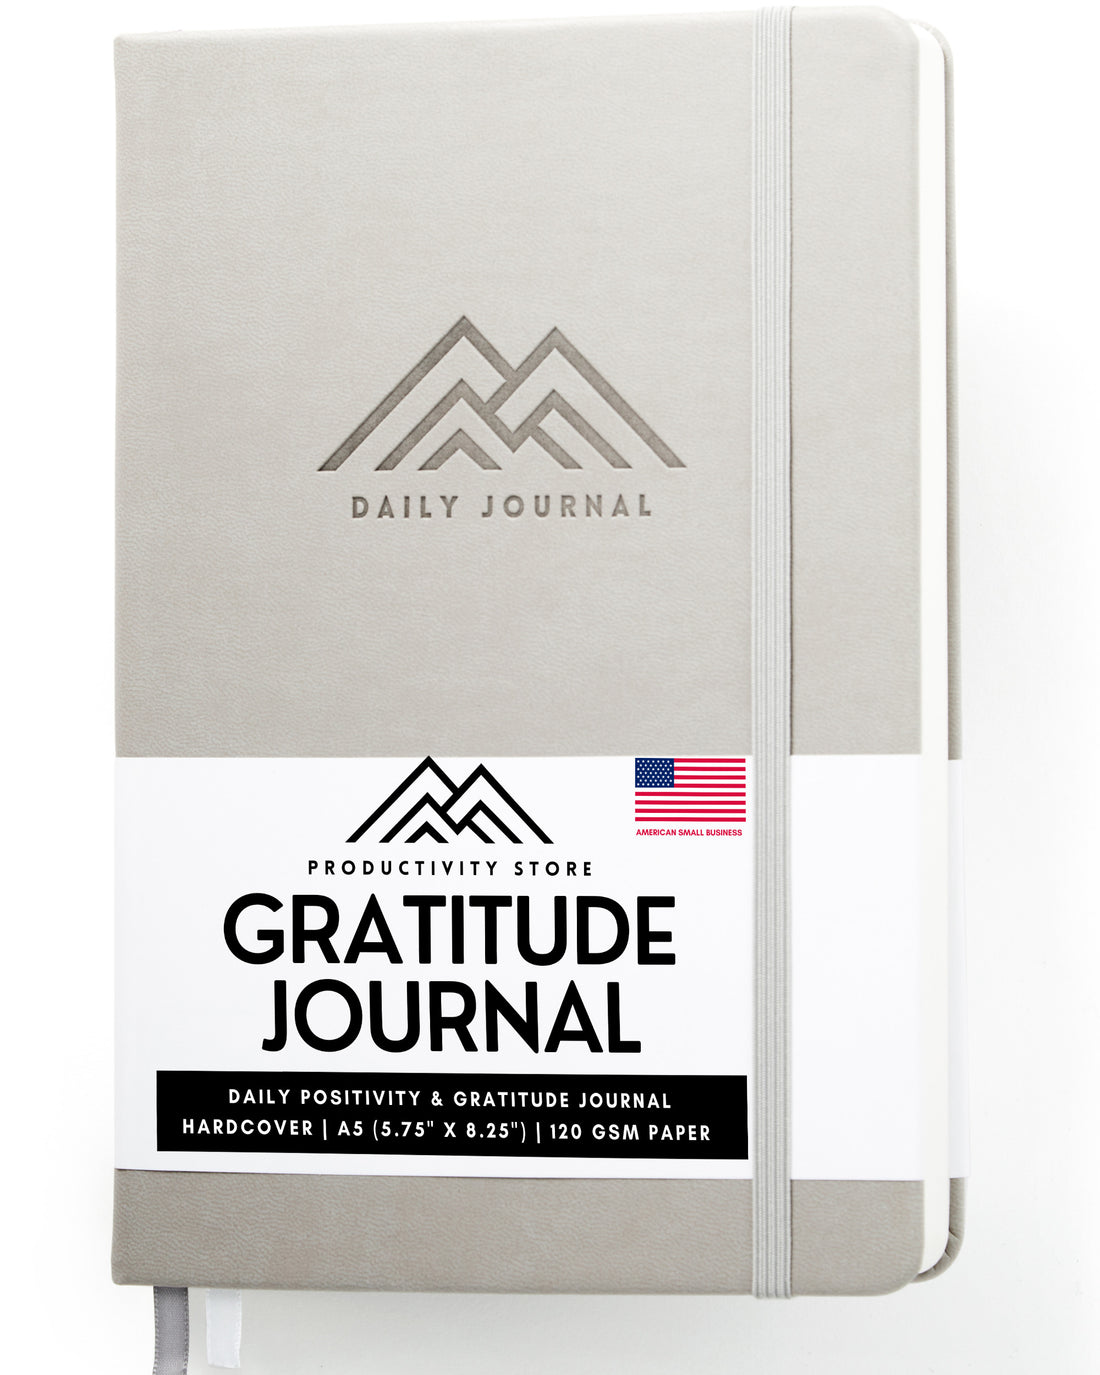 How to Personalize a Gratitude Journal